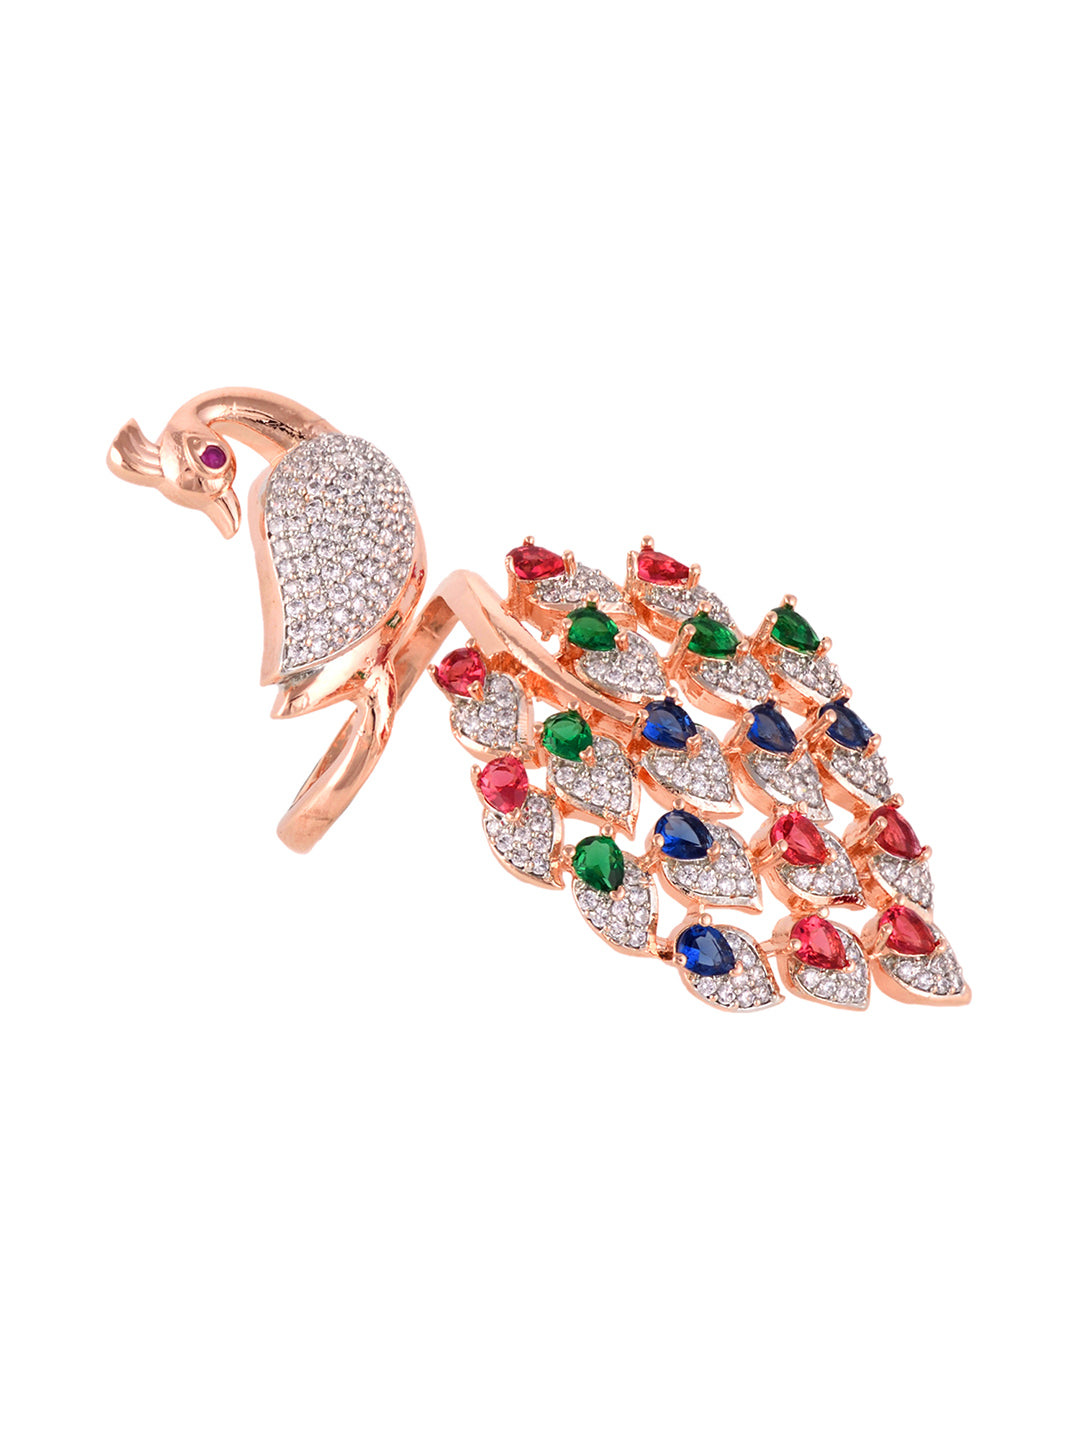 Rose Gold Plated Multi AD studded Peacock Handcrafted Finger Ring, zaveri pearls, sale price rs, sale price, sale gold plated, sale gold, sale, rubans, ring, regular price, priyassi jewellery